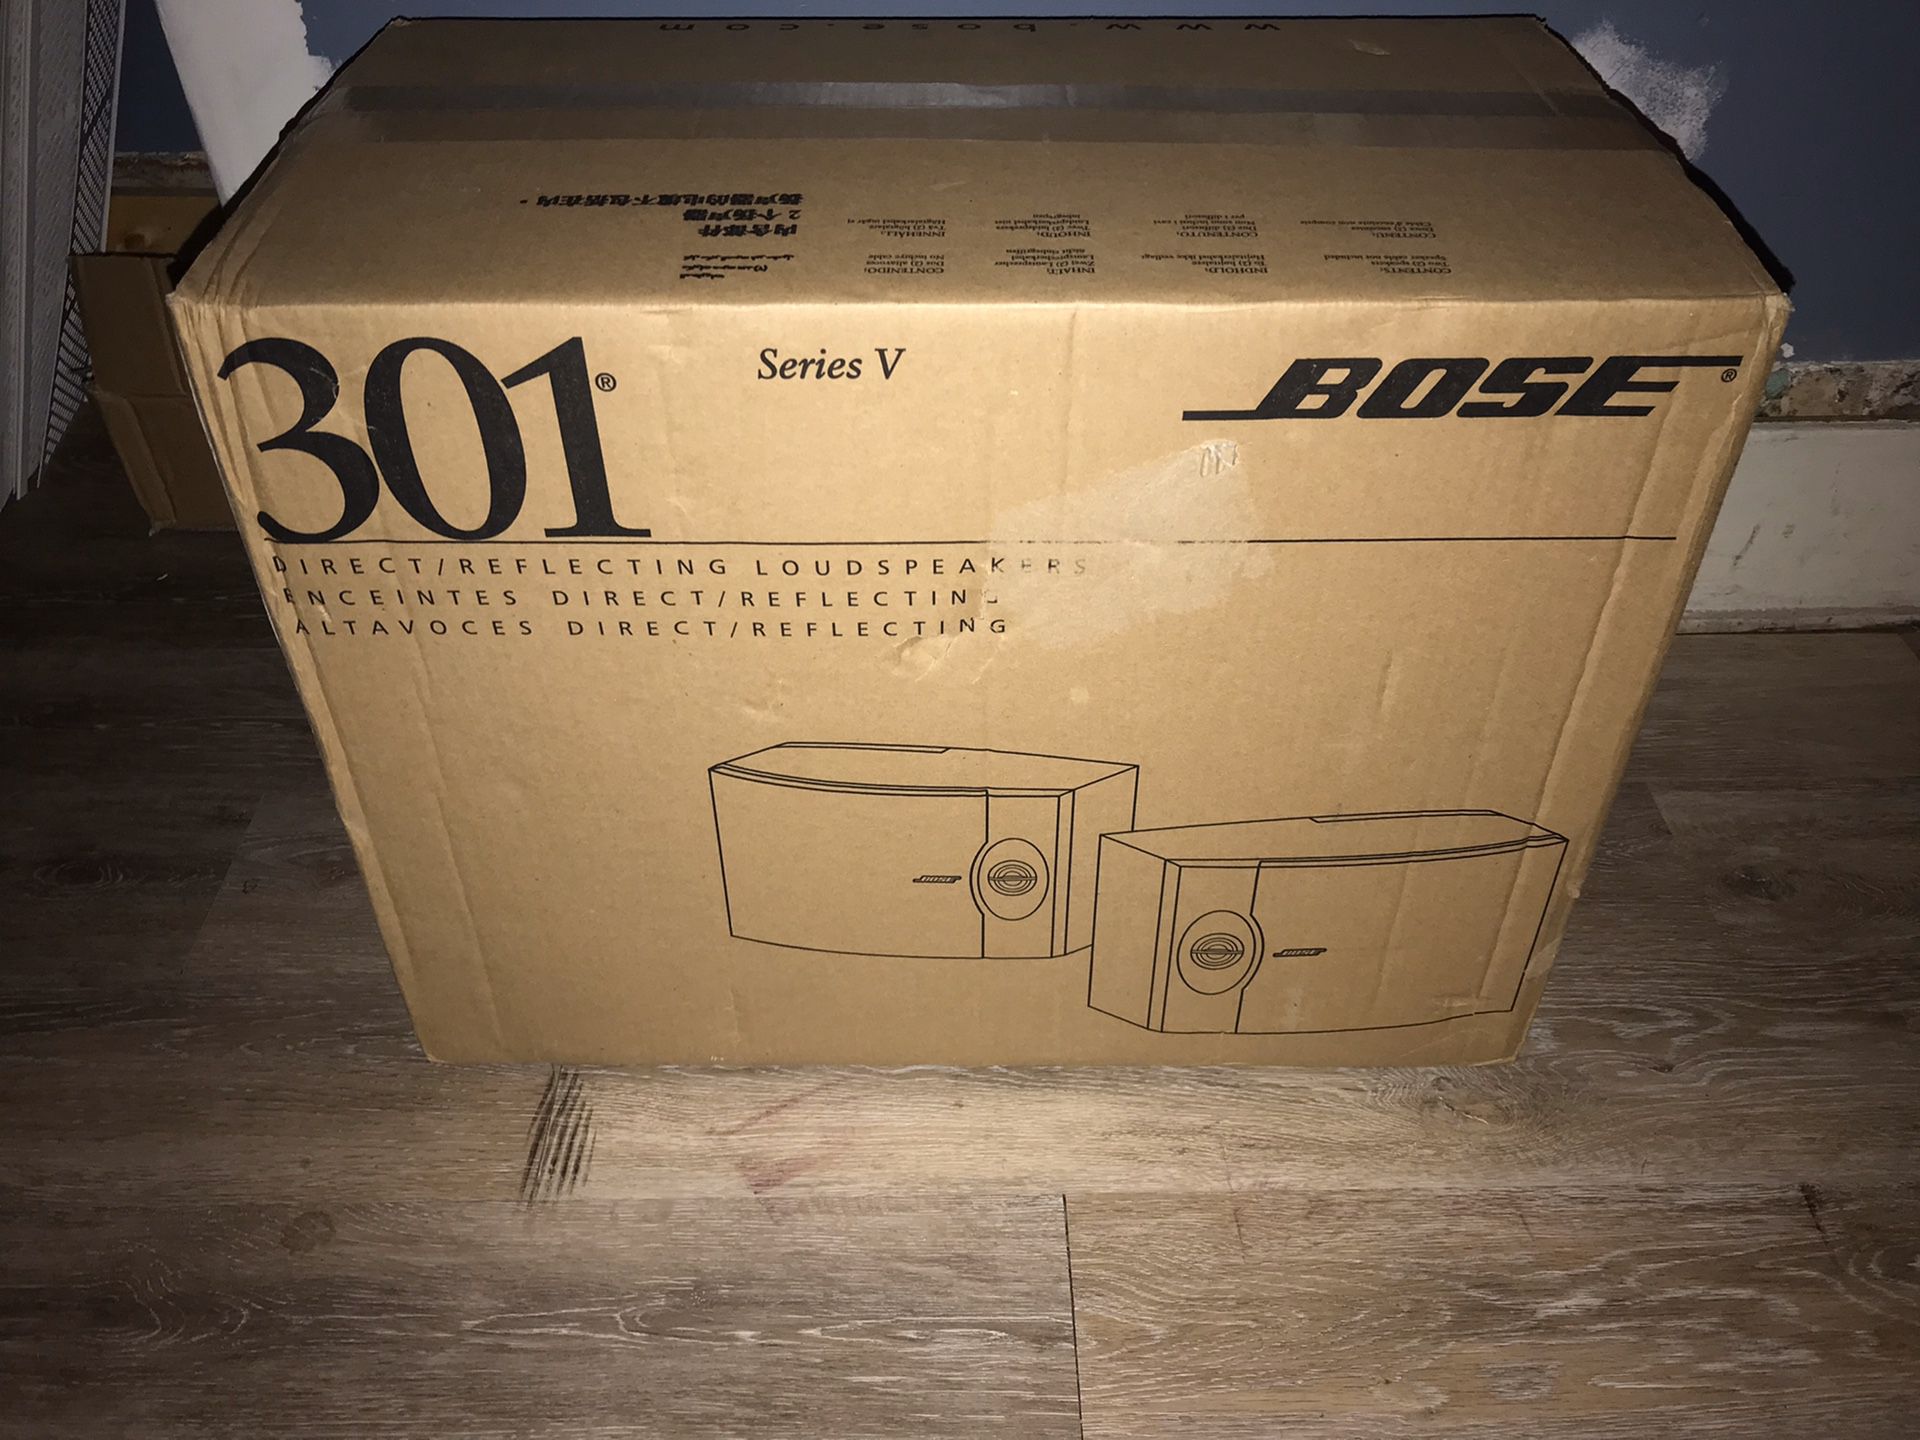 Bose series v speakers taking all offers within reason